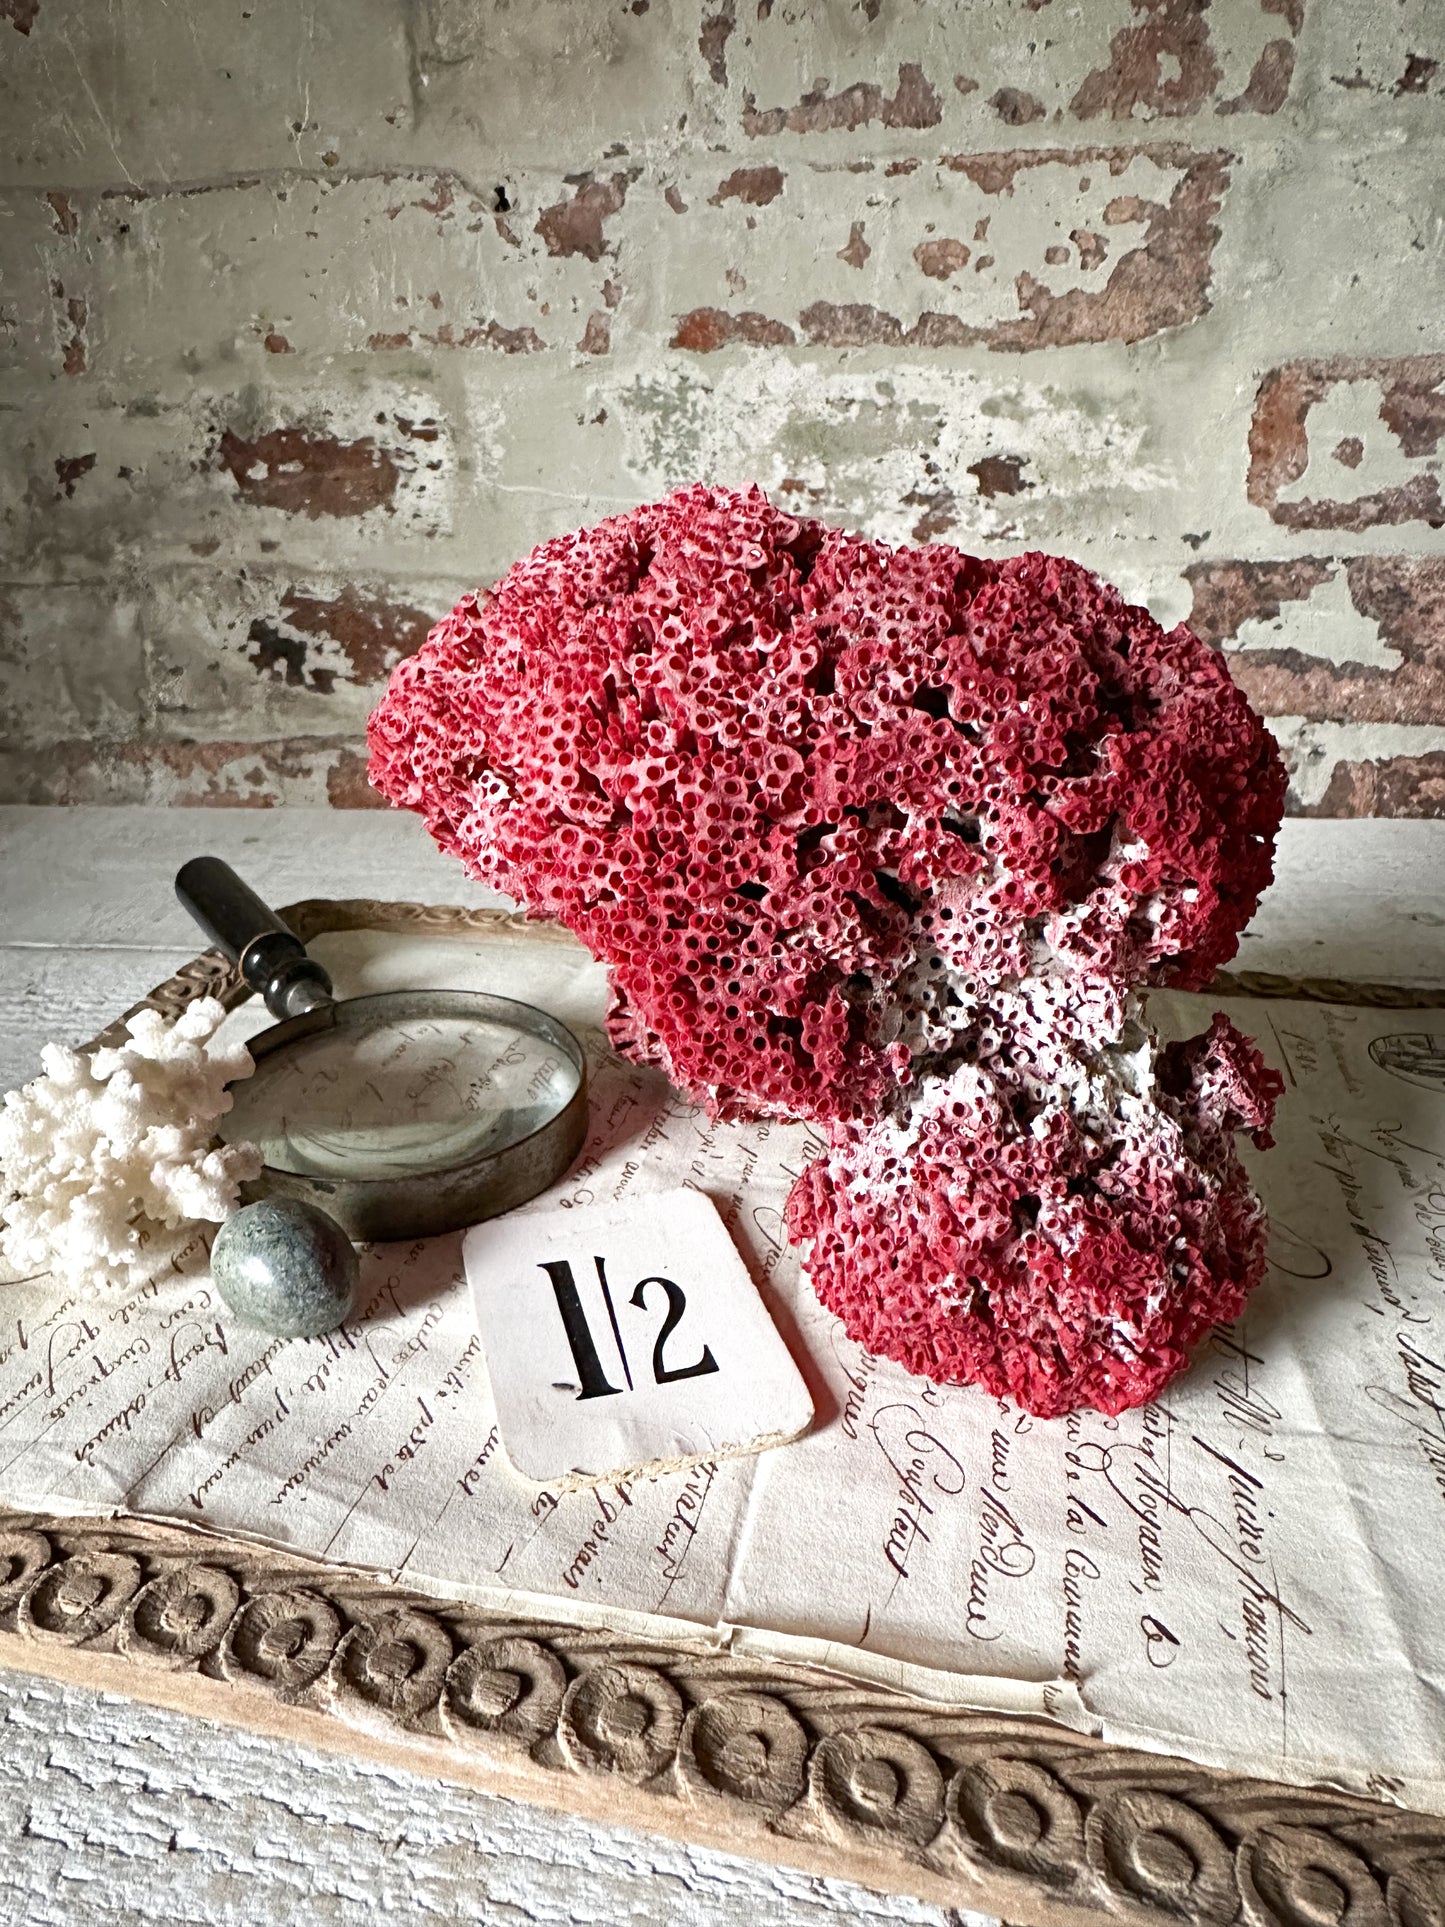 A beautiful large rare piece of natural sea coral in dark pink